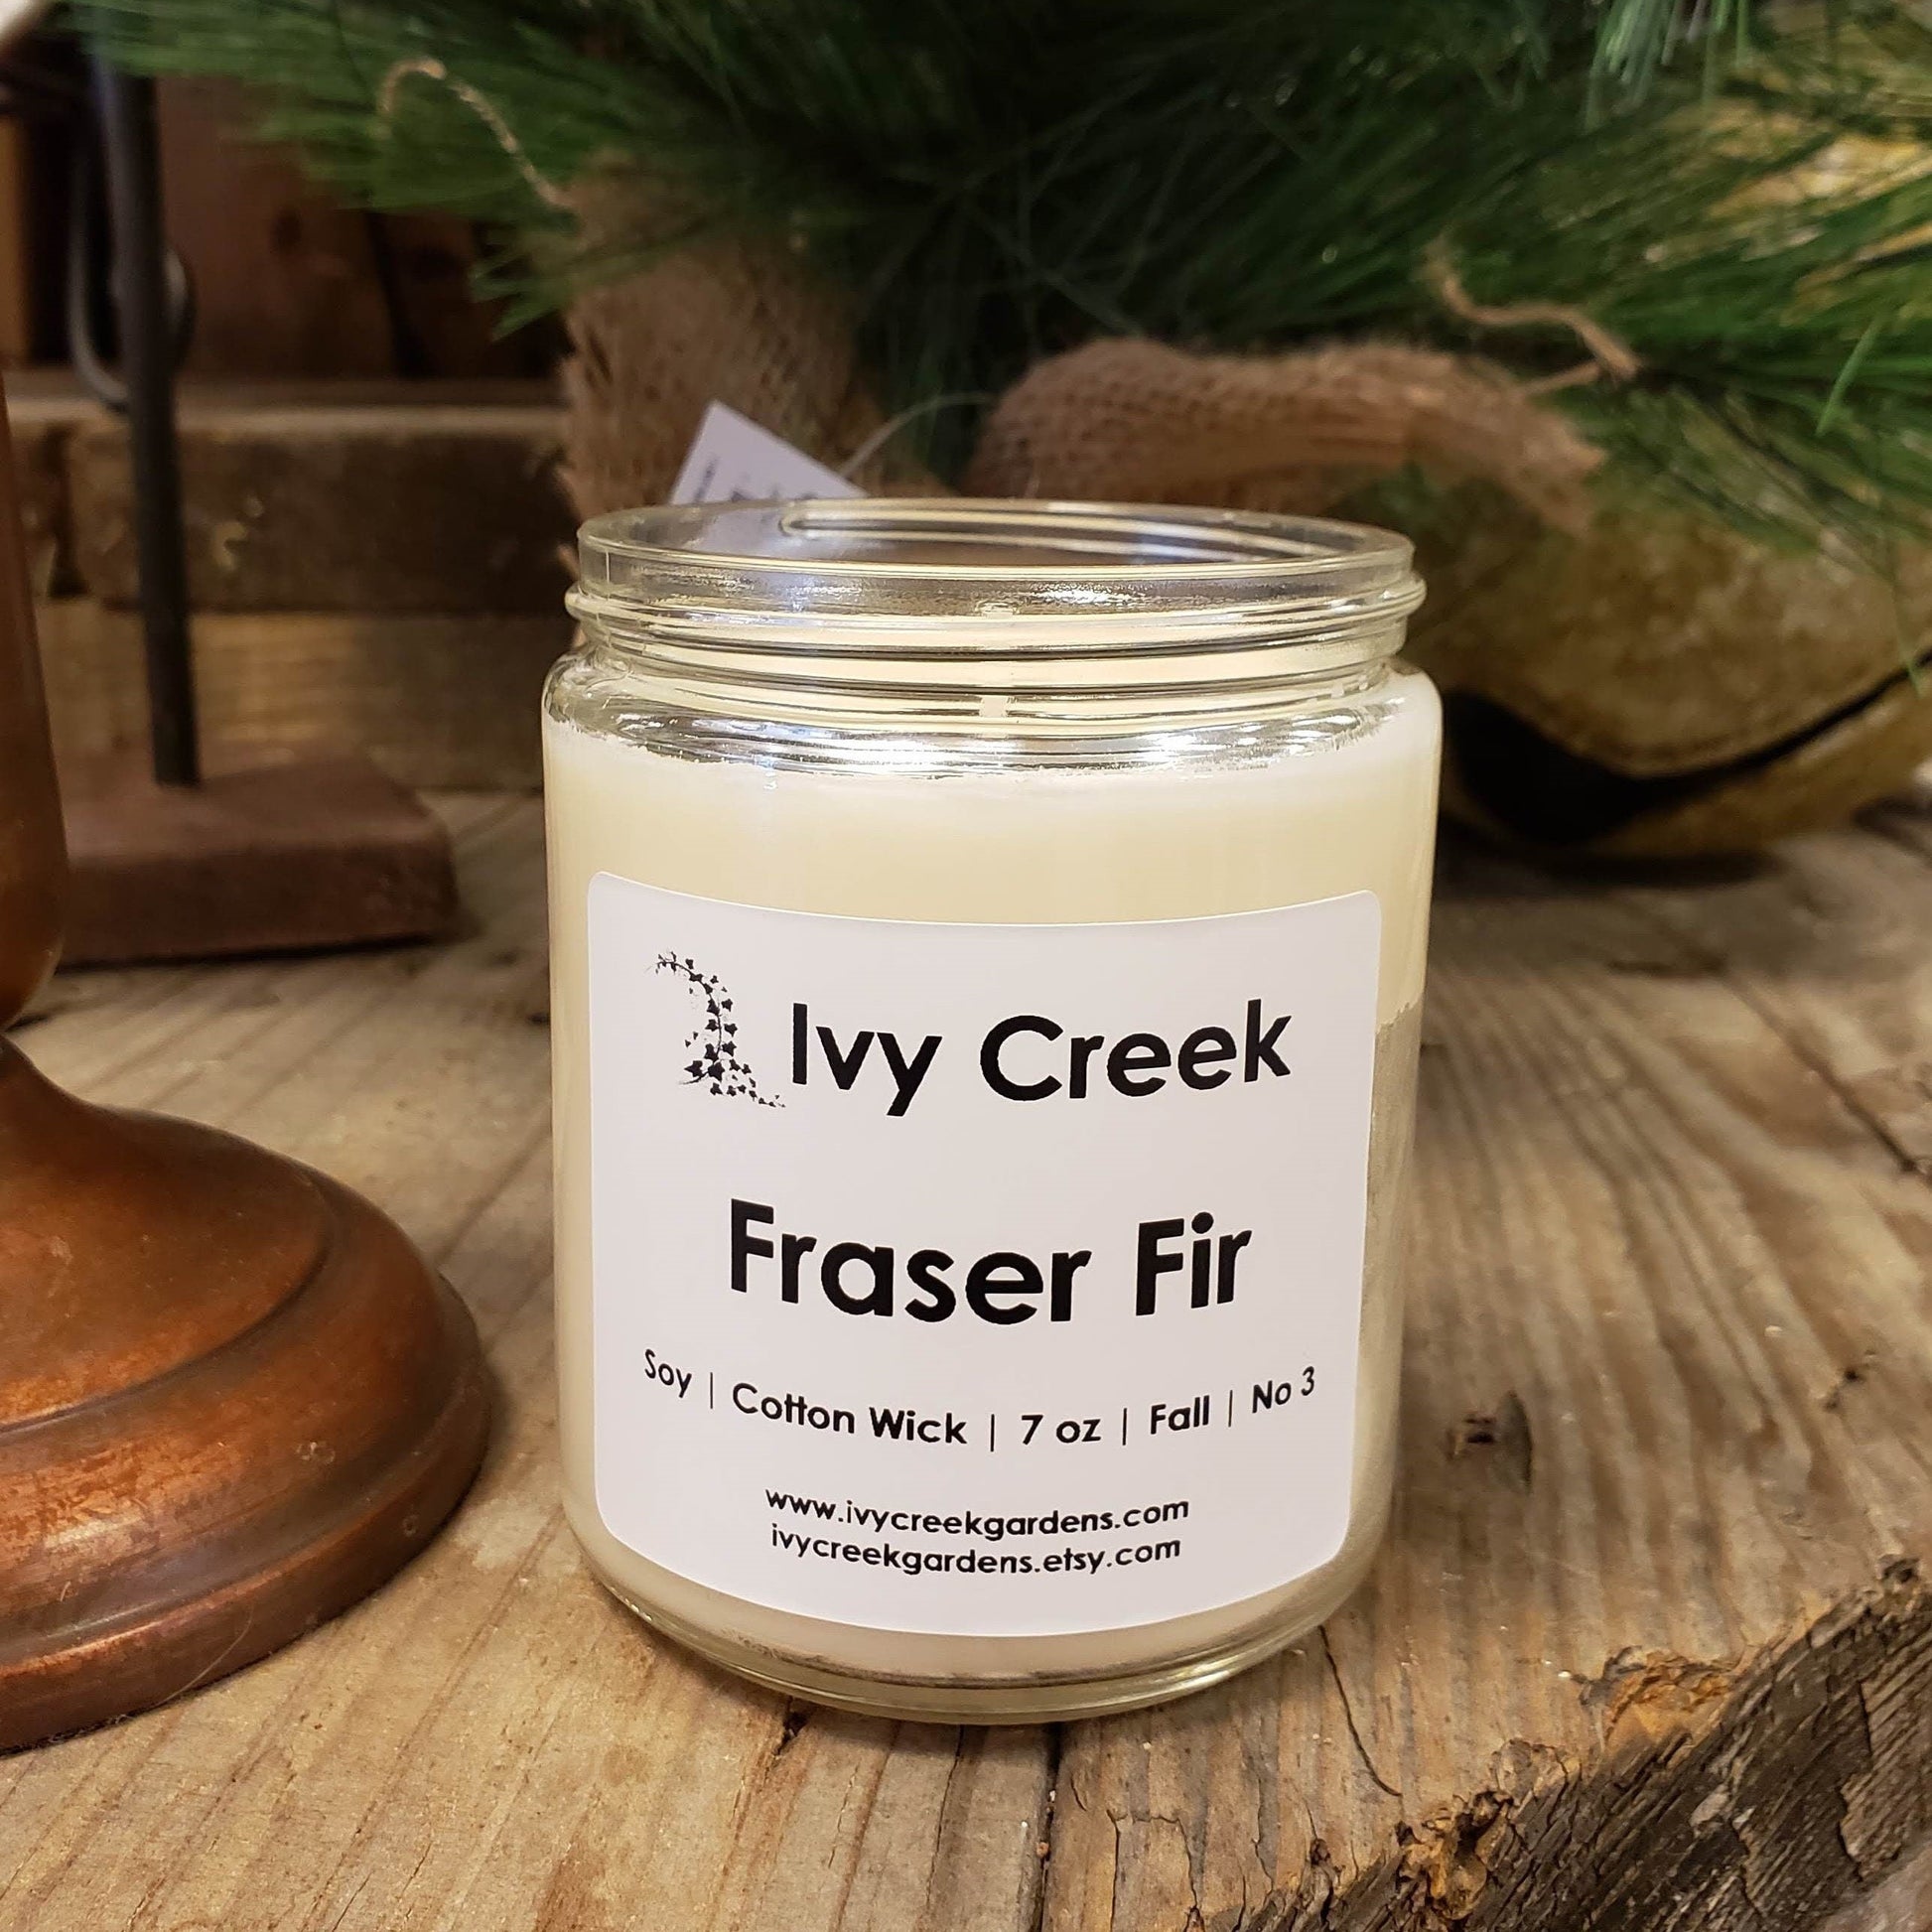 Ivy Creek No 3 | Fraser Fir Soy Blend Candle | Hand Poured | 7 oz | Cotton Wick | Small Batch | Clean Burning | Container Candle | Christmas